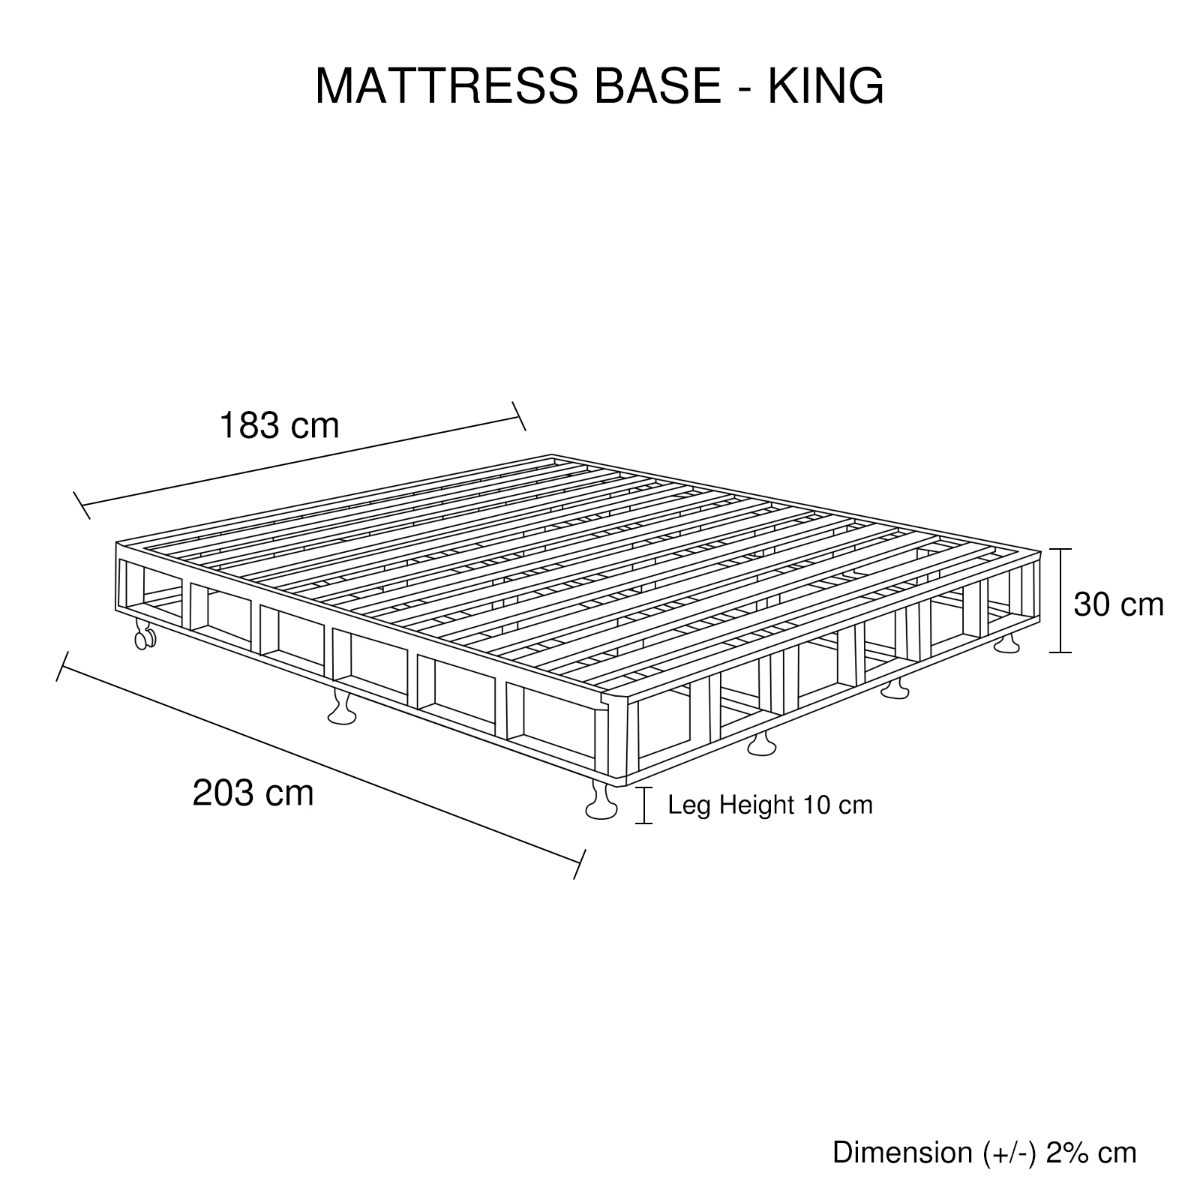 Mattress Base Ensemble King Size Solid Wooden Slat in Beige with Removable Cover